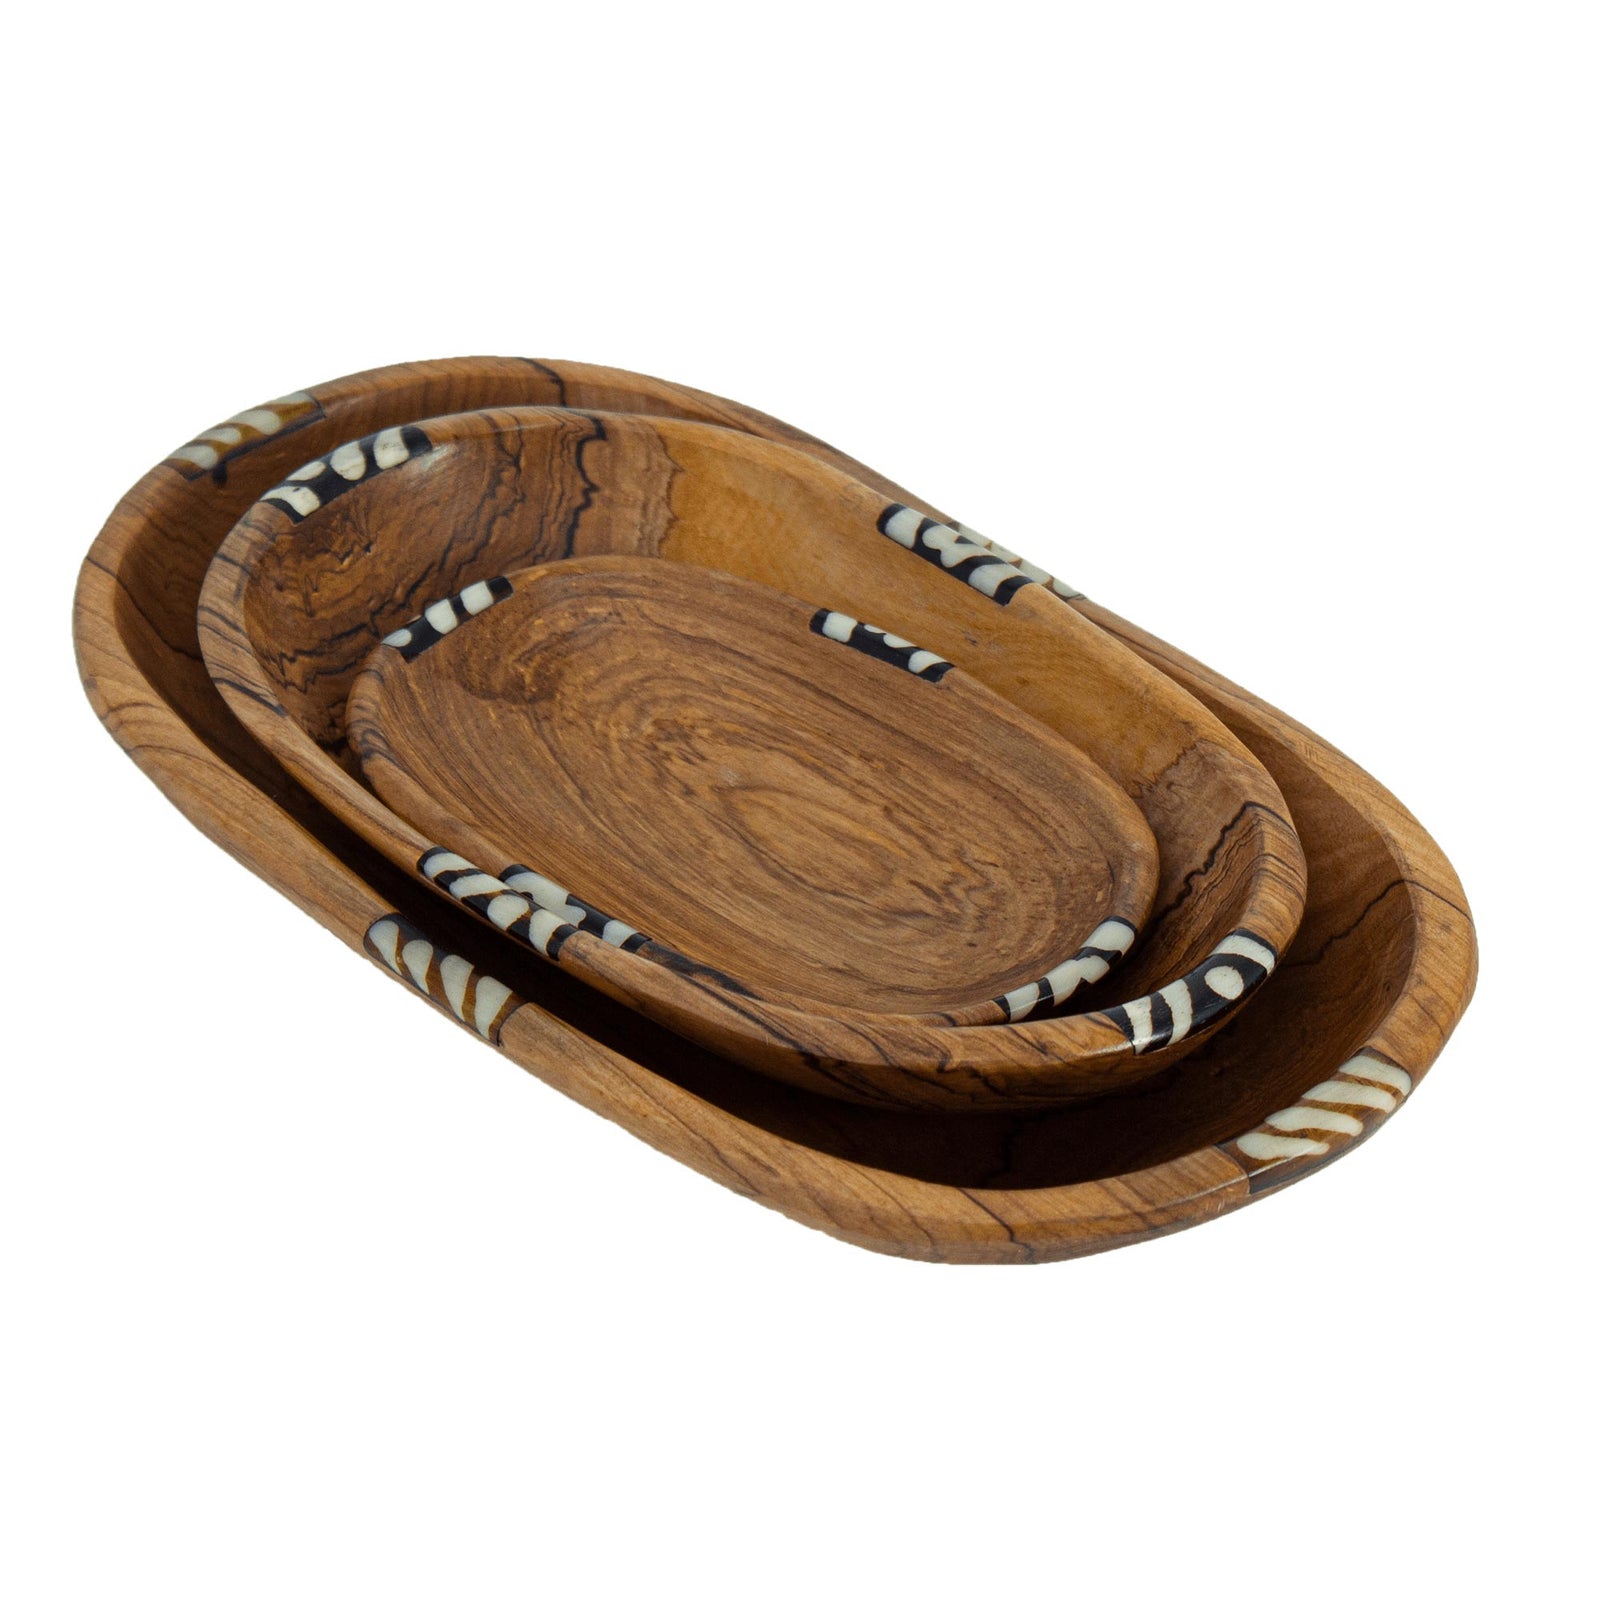 6-Inch Hand-carved Olive Wood Bowl Handmade and Fair Trade - Drop Shipping  By Global Crafts